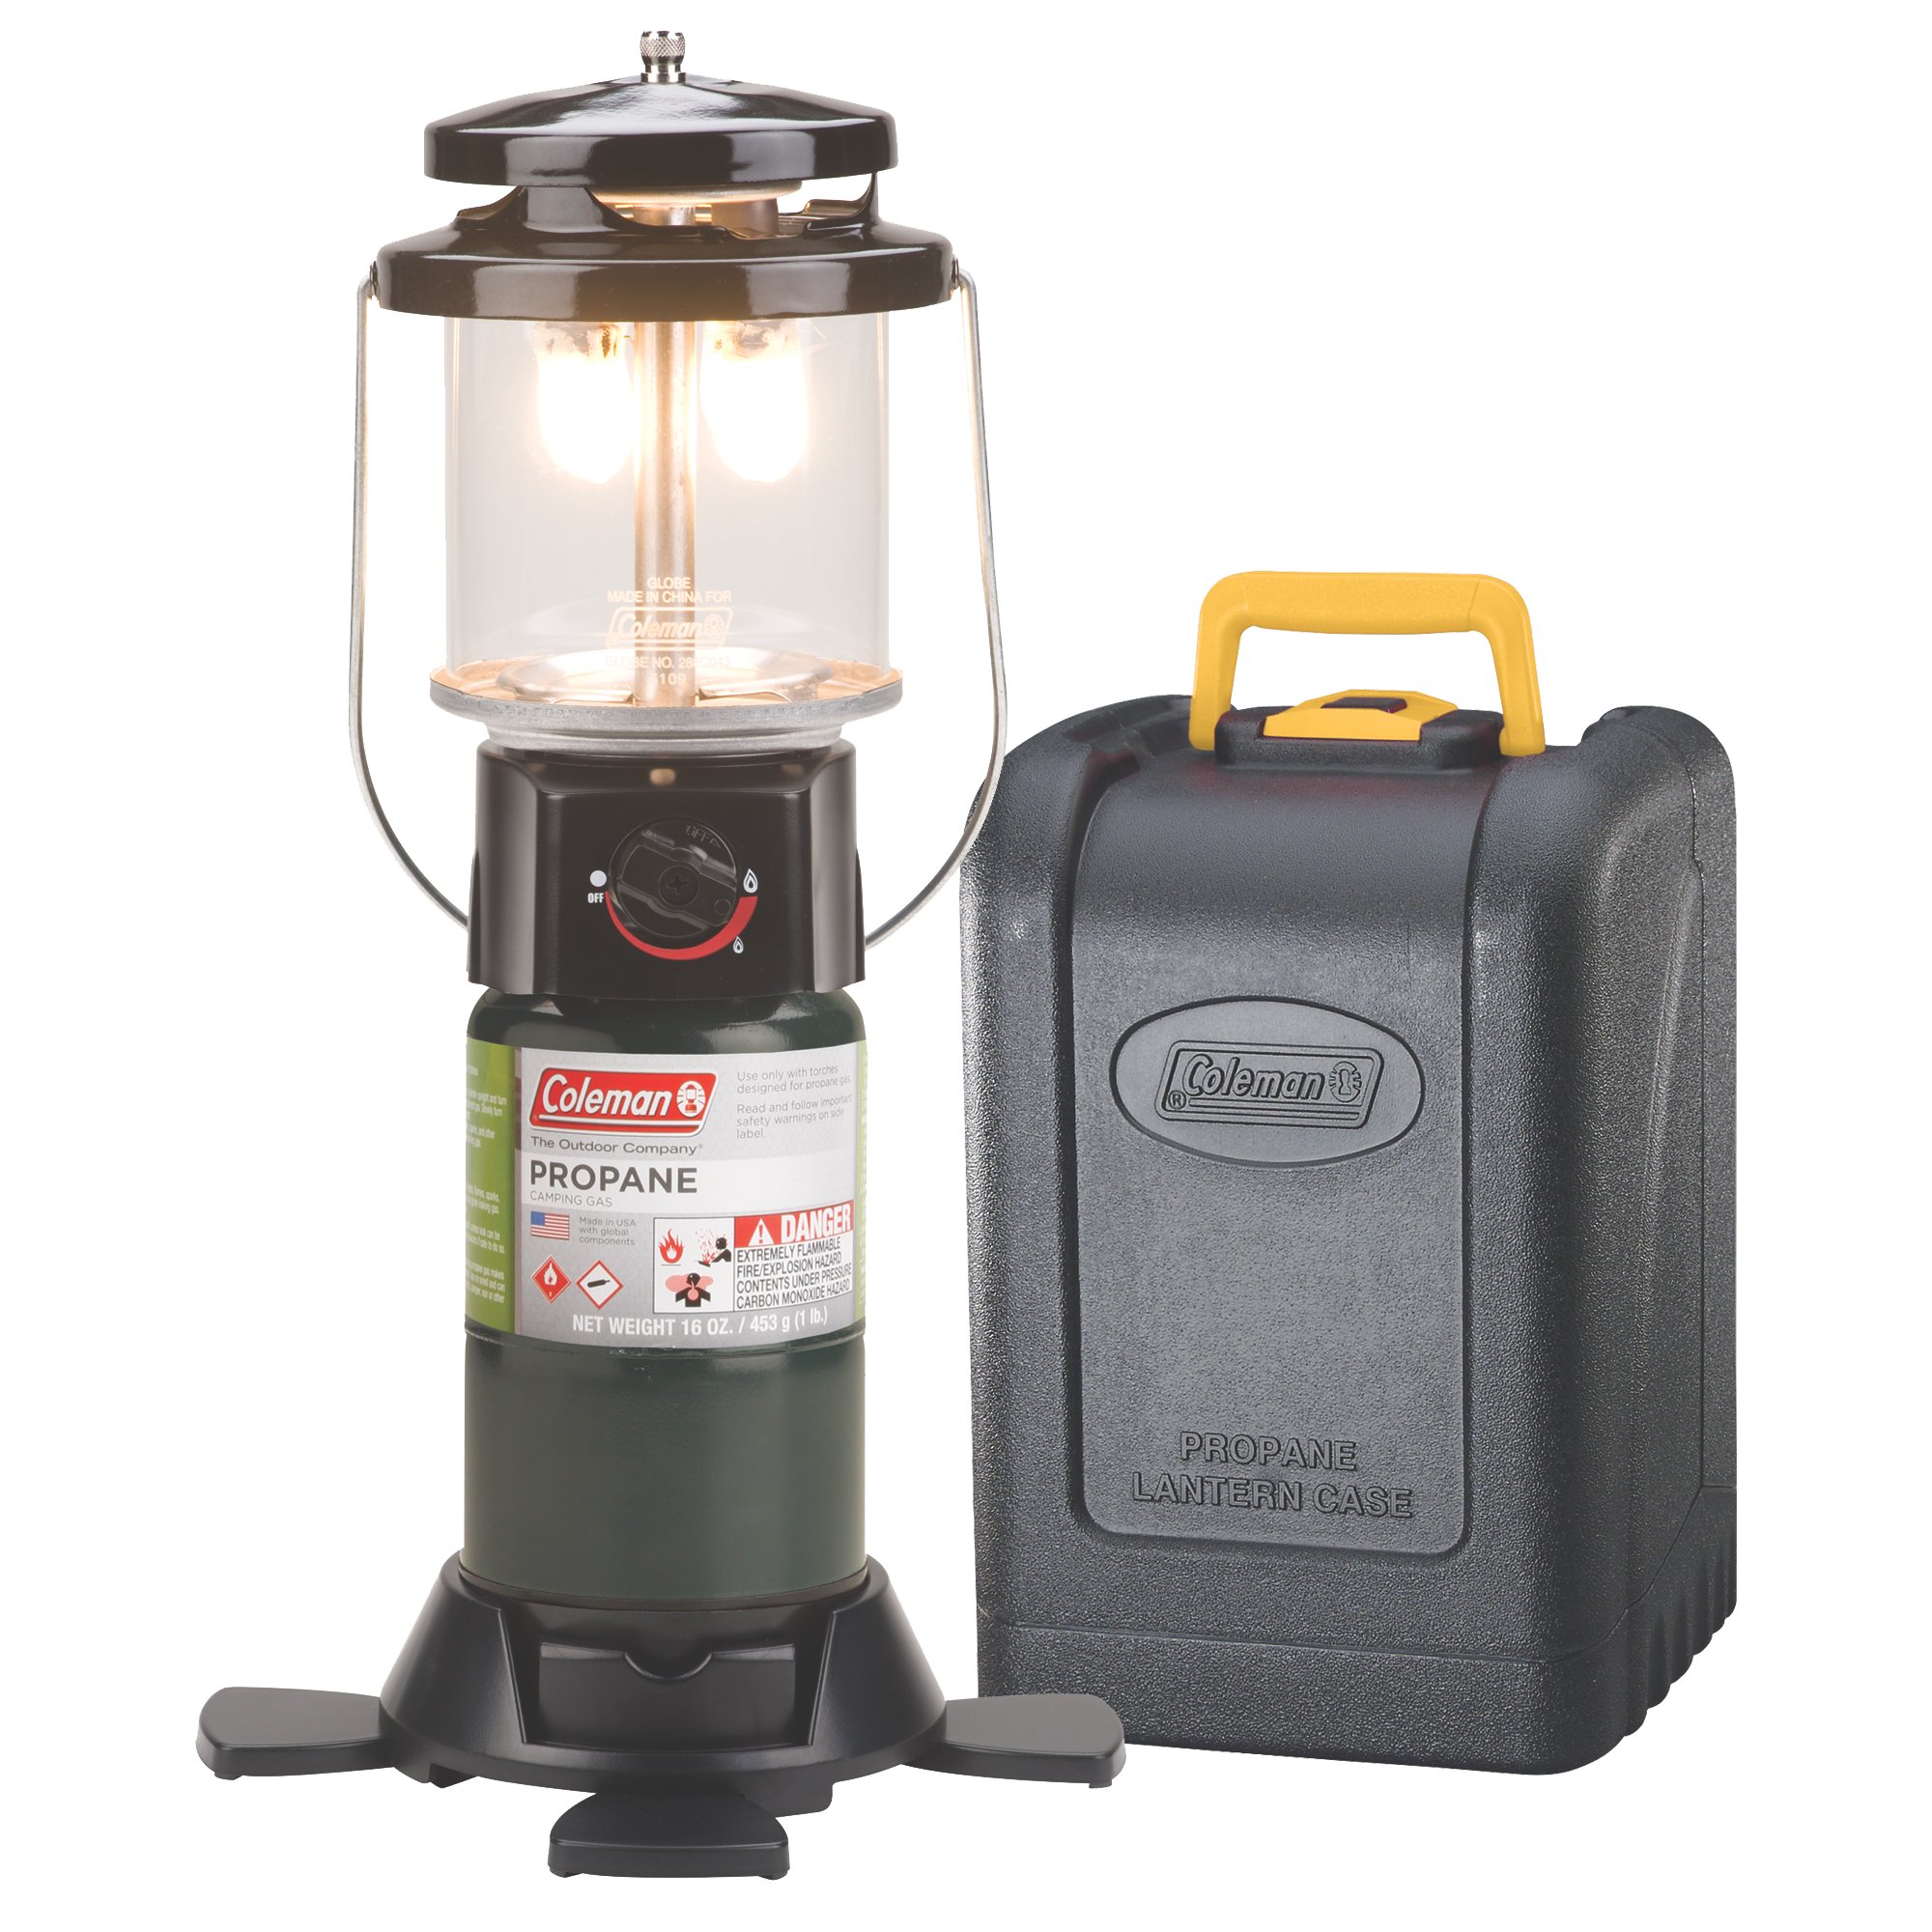 Deluxe Propane Lantern with Case | Coleman